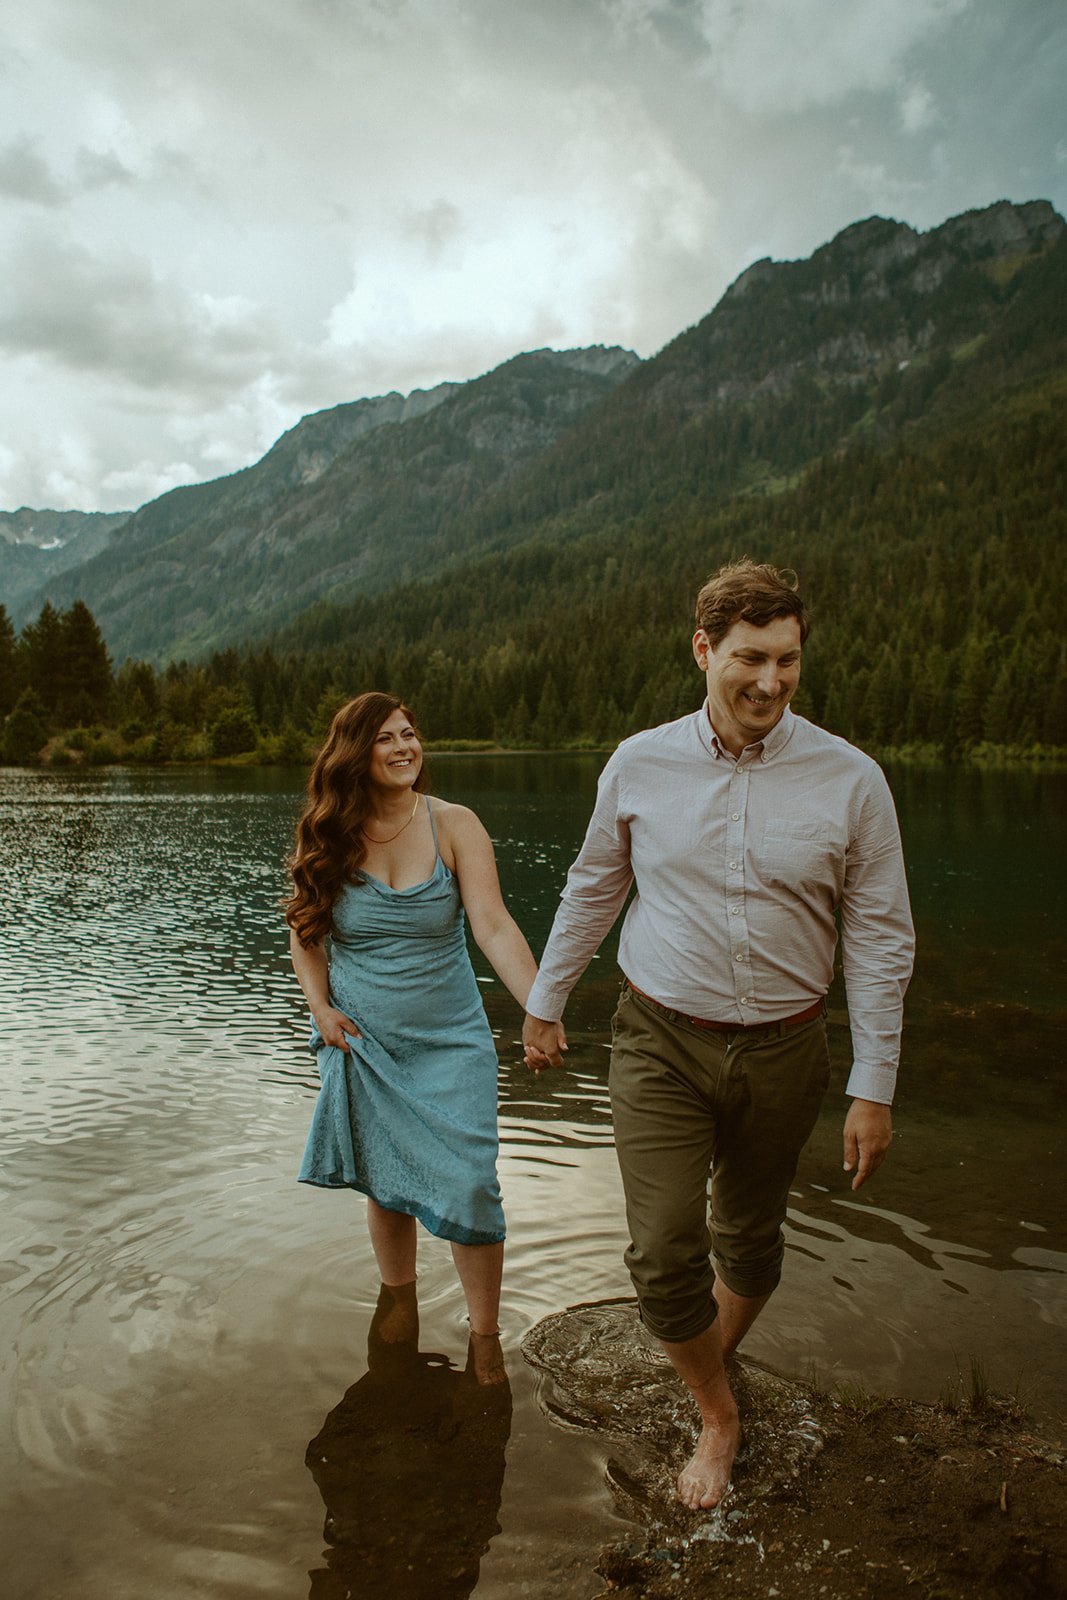 A Gold Creek Pond Outdoor Engagement Session - Shanean + Ian (17).jpg